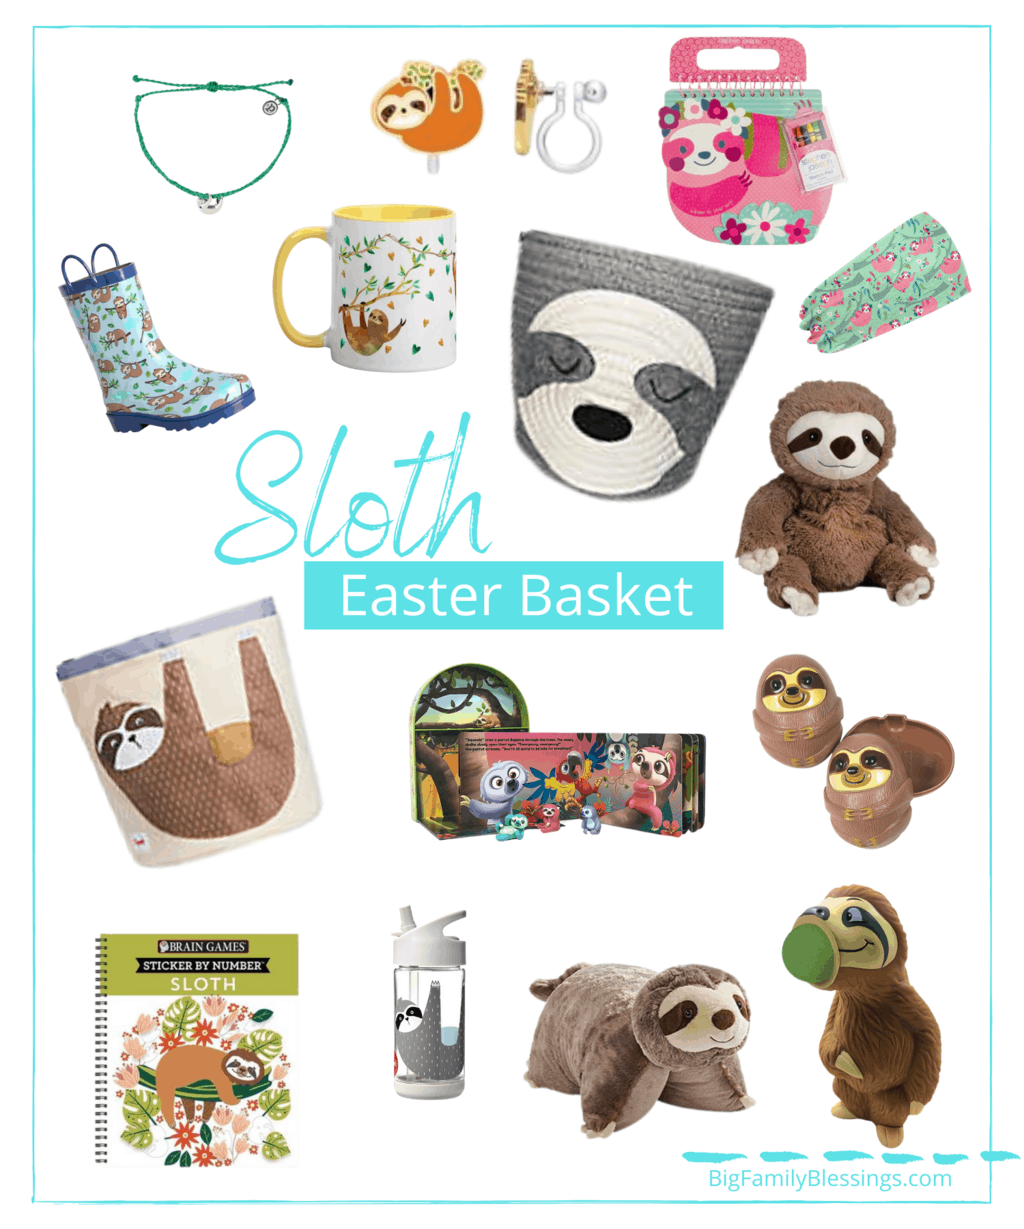 25+ Awesome Easter Basket Ideas for Sloth Loving Girls